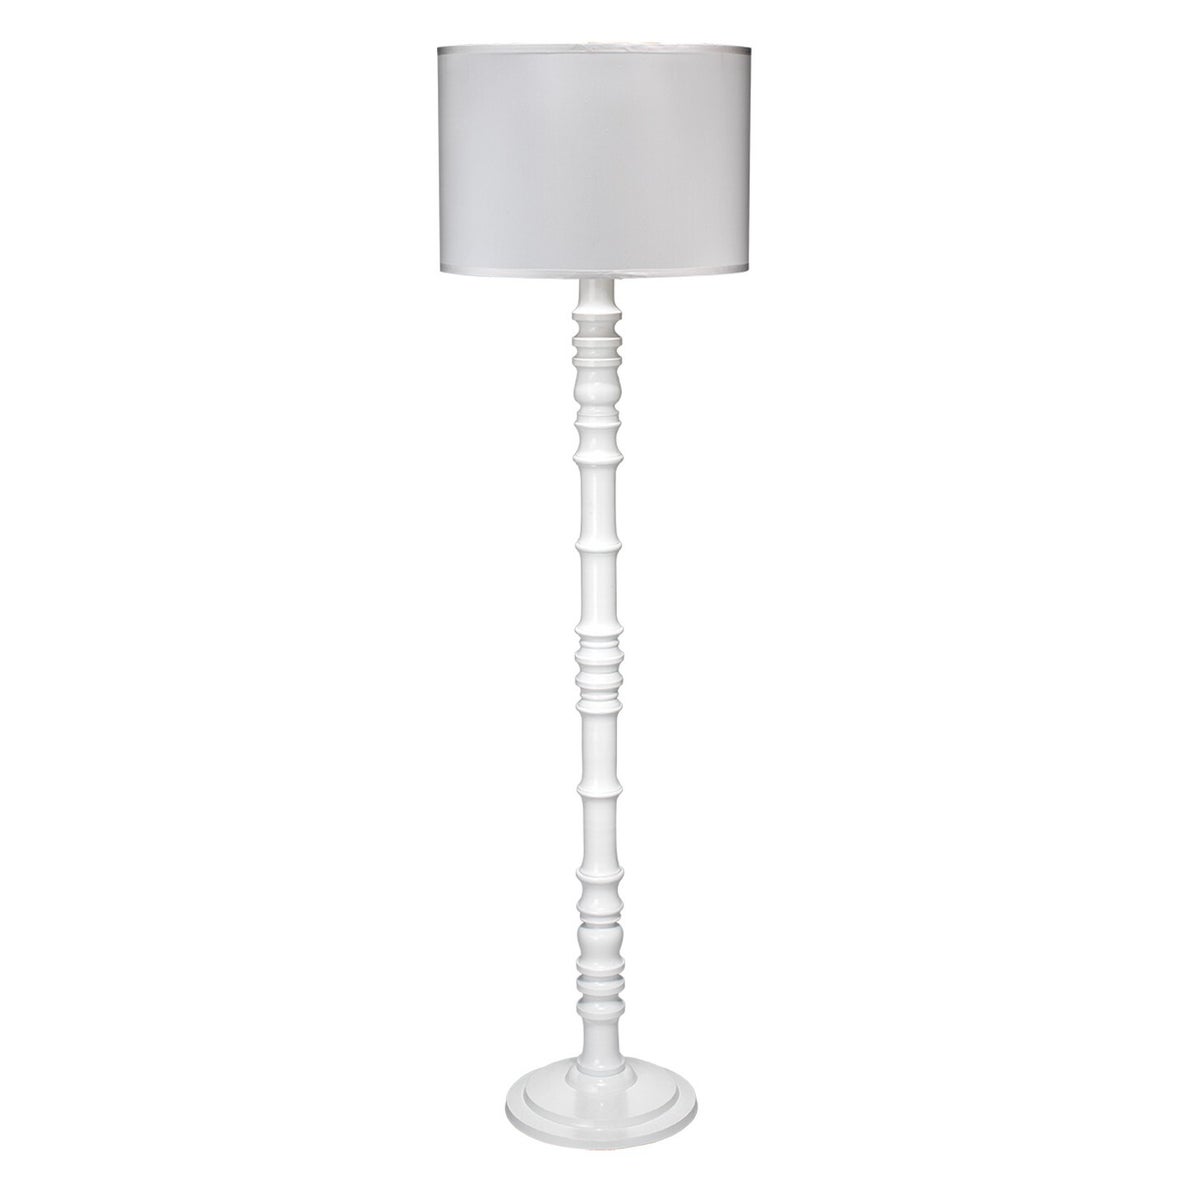 Longshan White Floor Lamp with Large Drum Shade